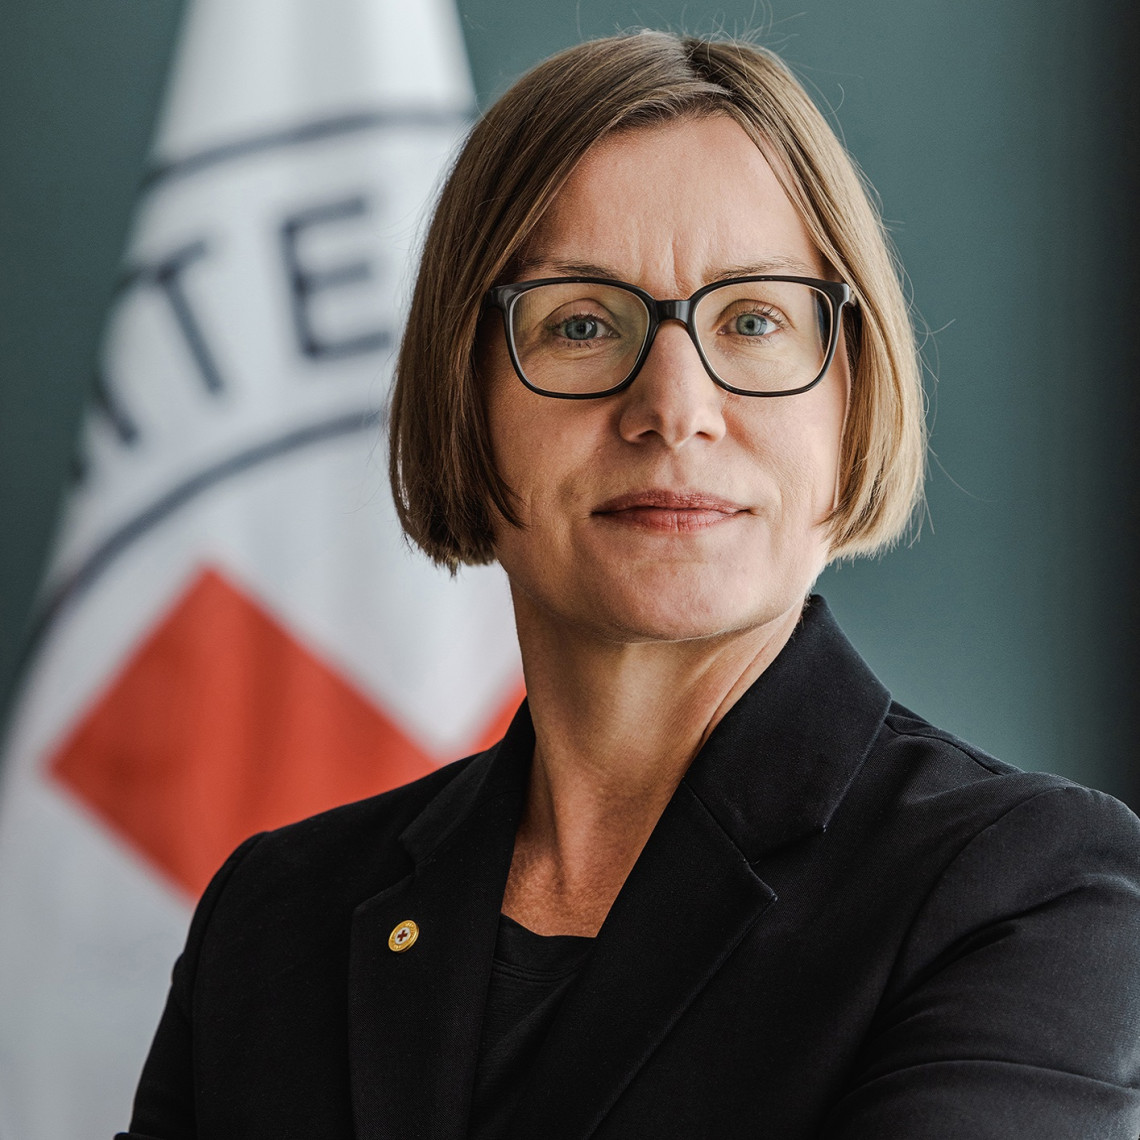 Mirjana Spoljaric Egger Assumes the Presidency of the International Committee of the Red Cross (ICRC)